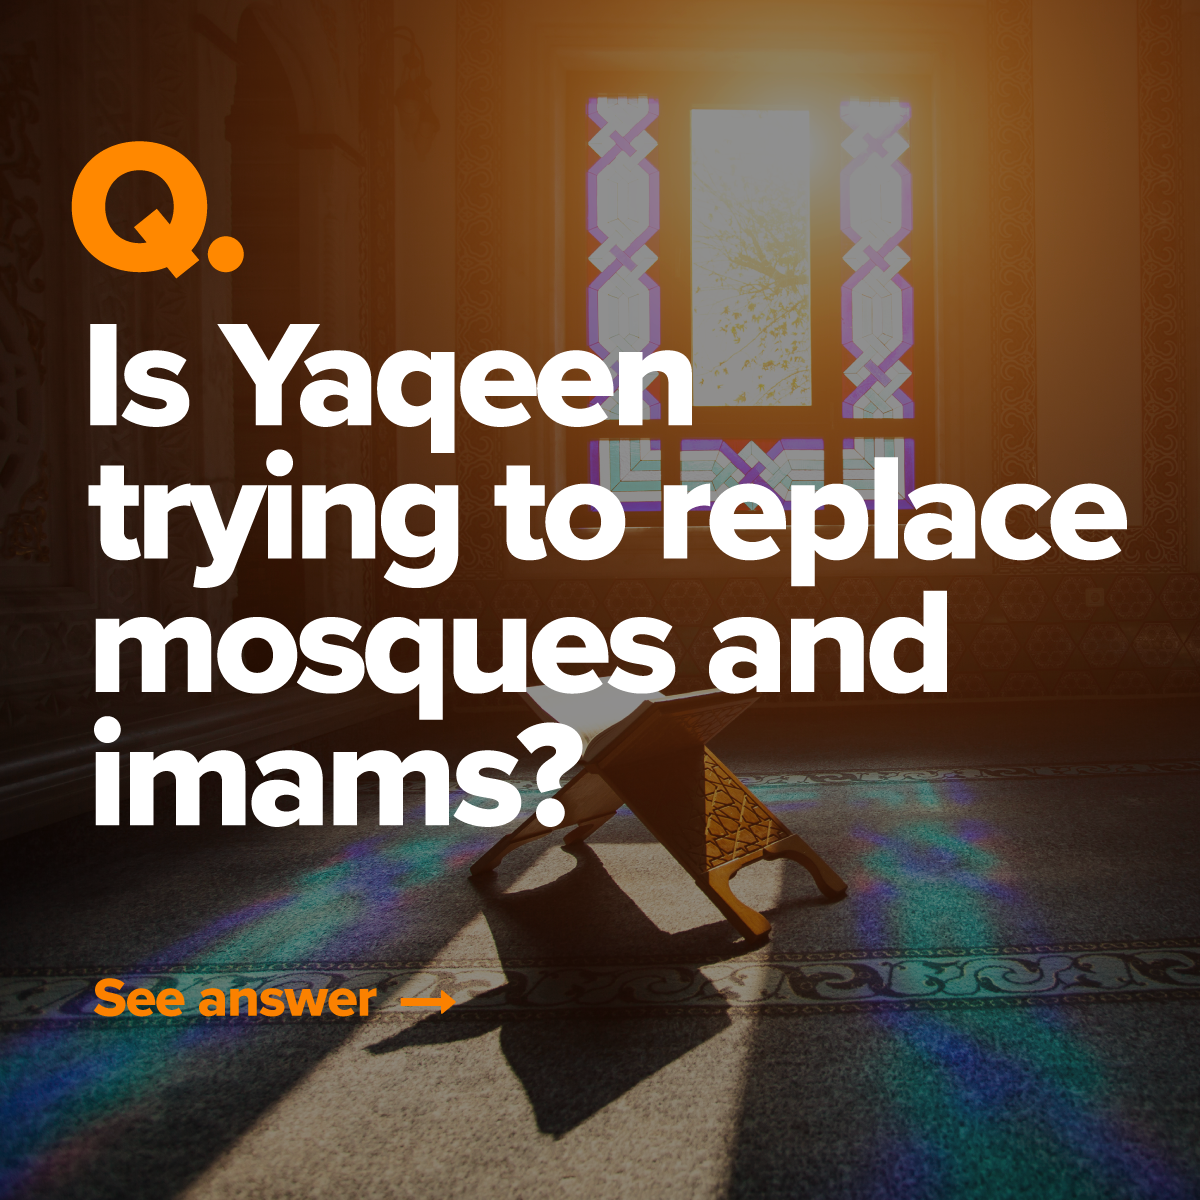 Question 2: Is Yaqeen trying to replace mosques and imams?